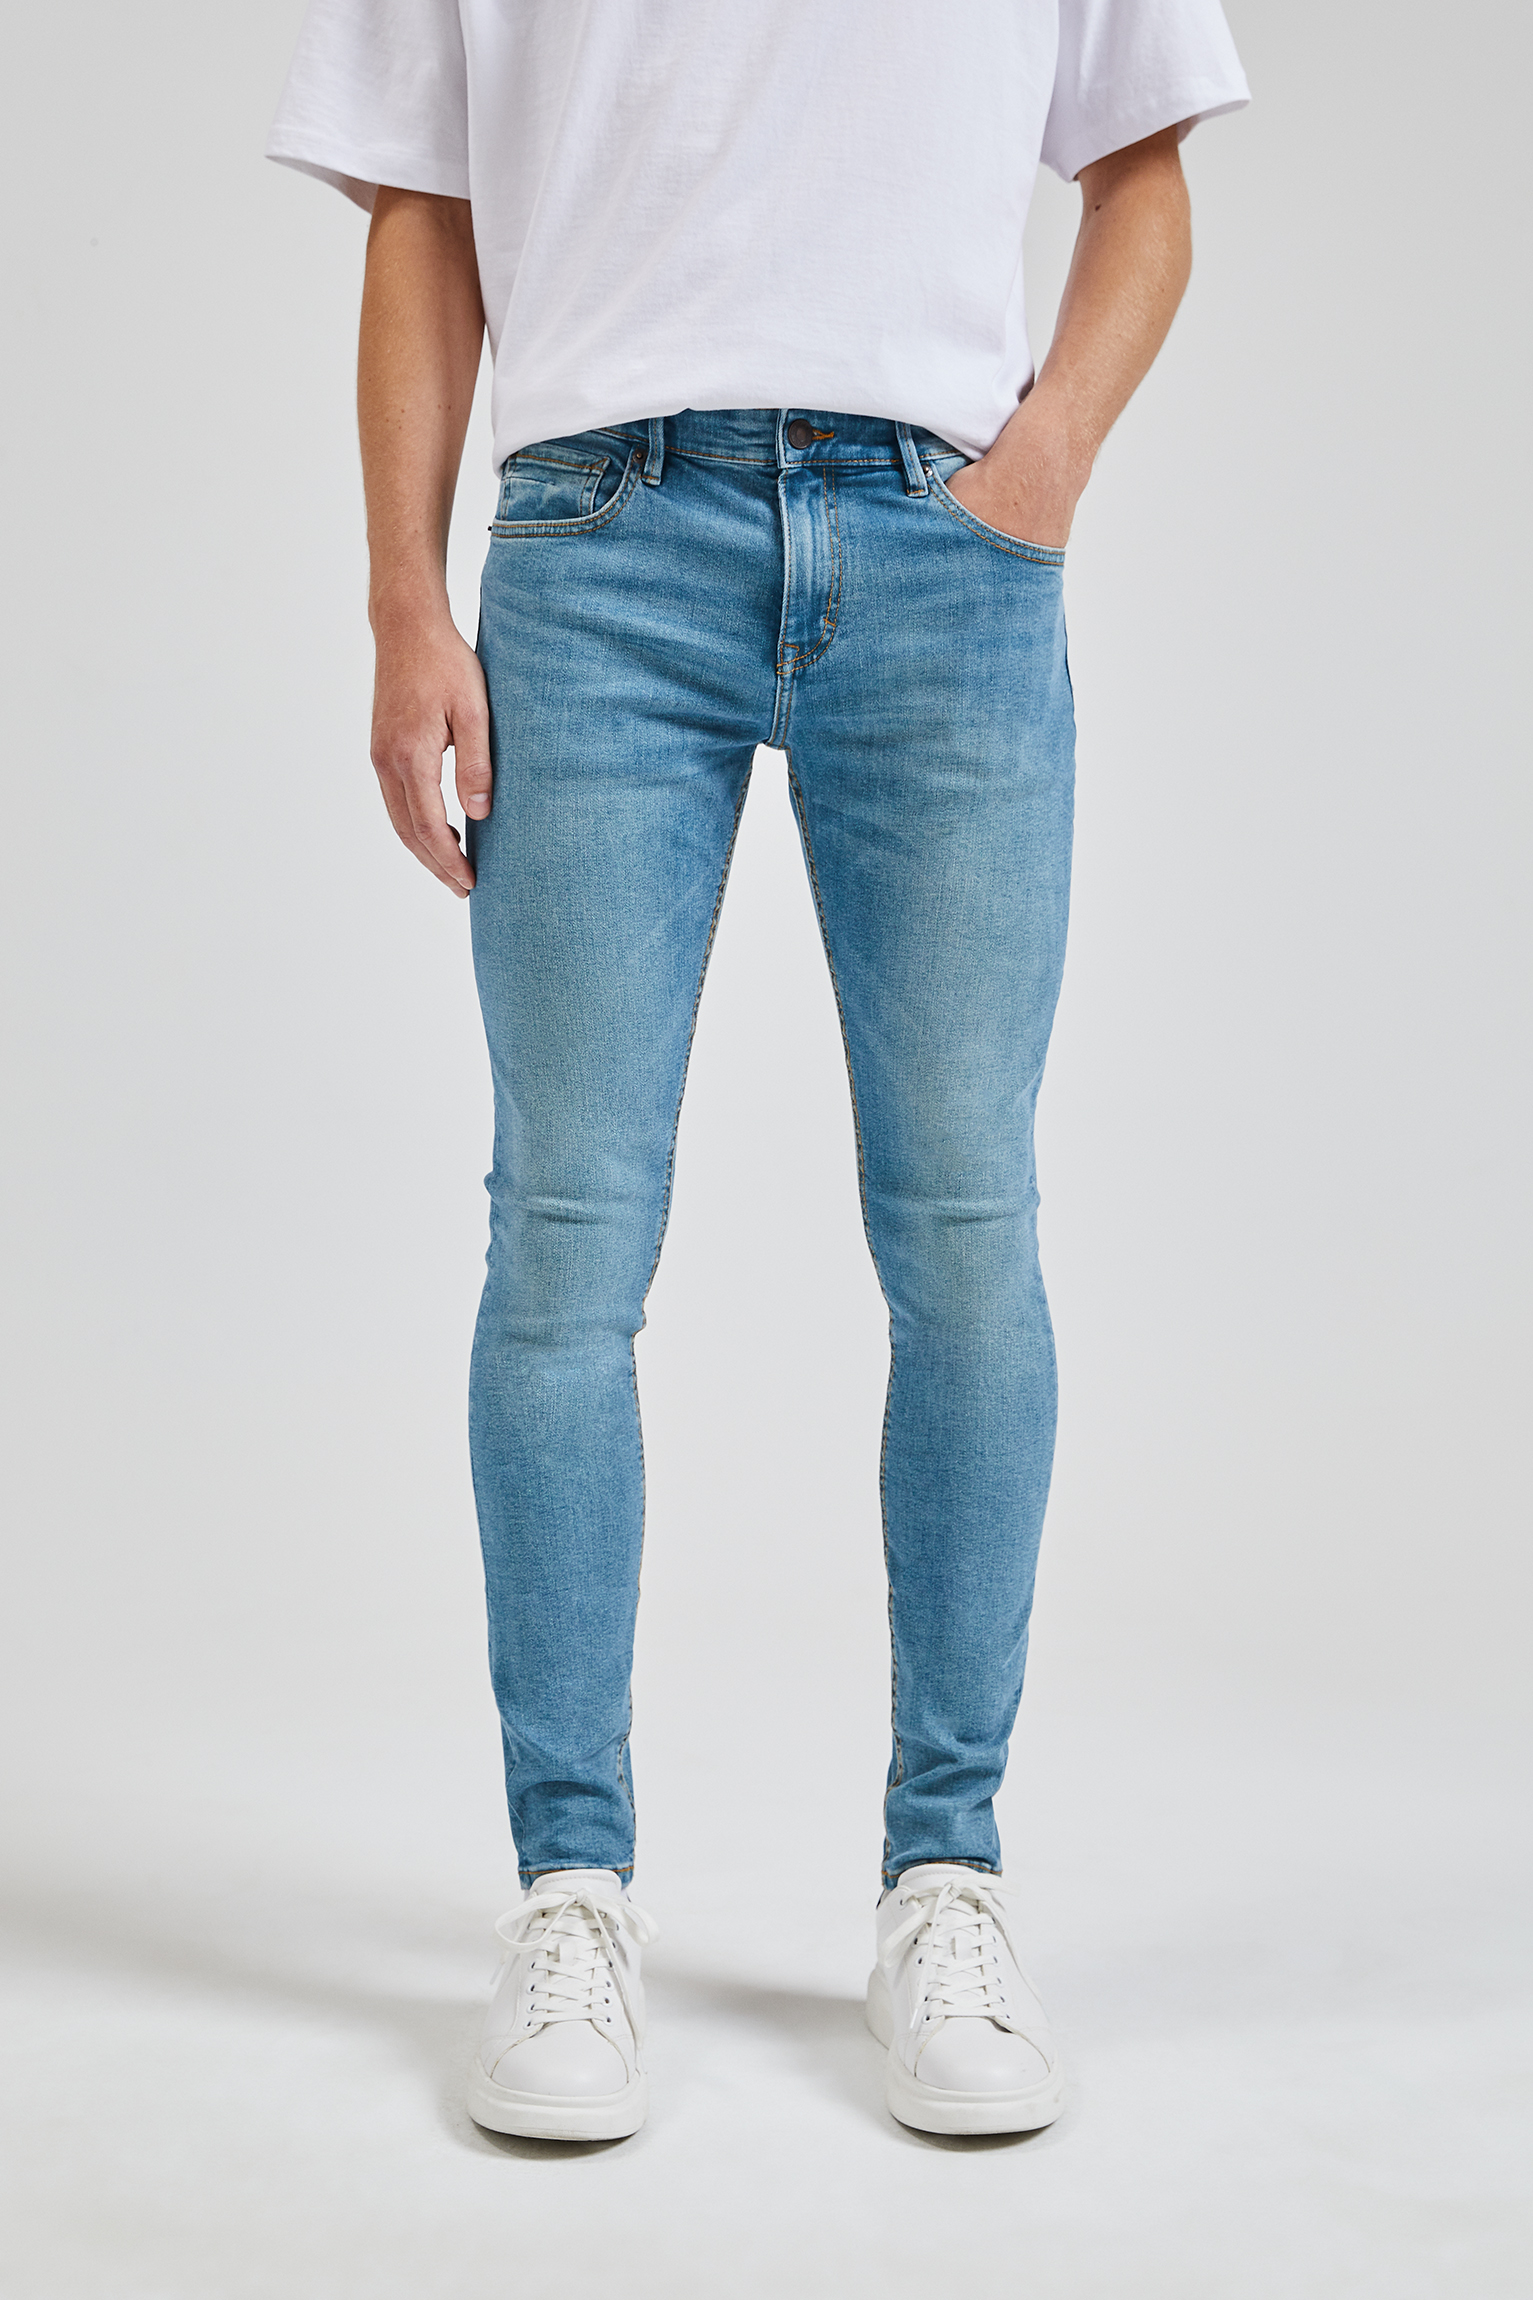 super skinny jeans pull and bear